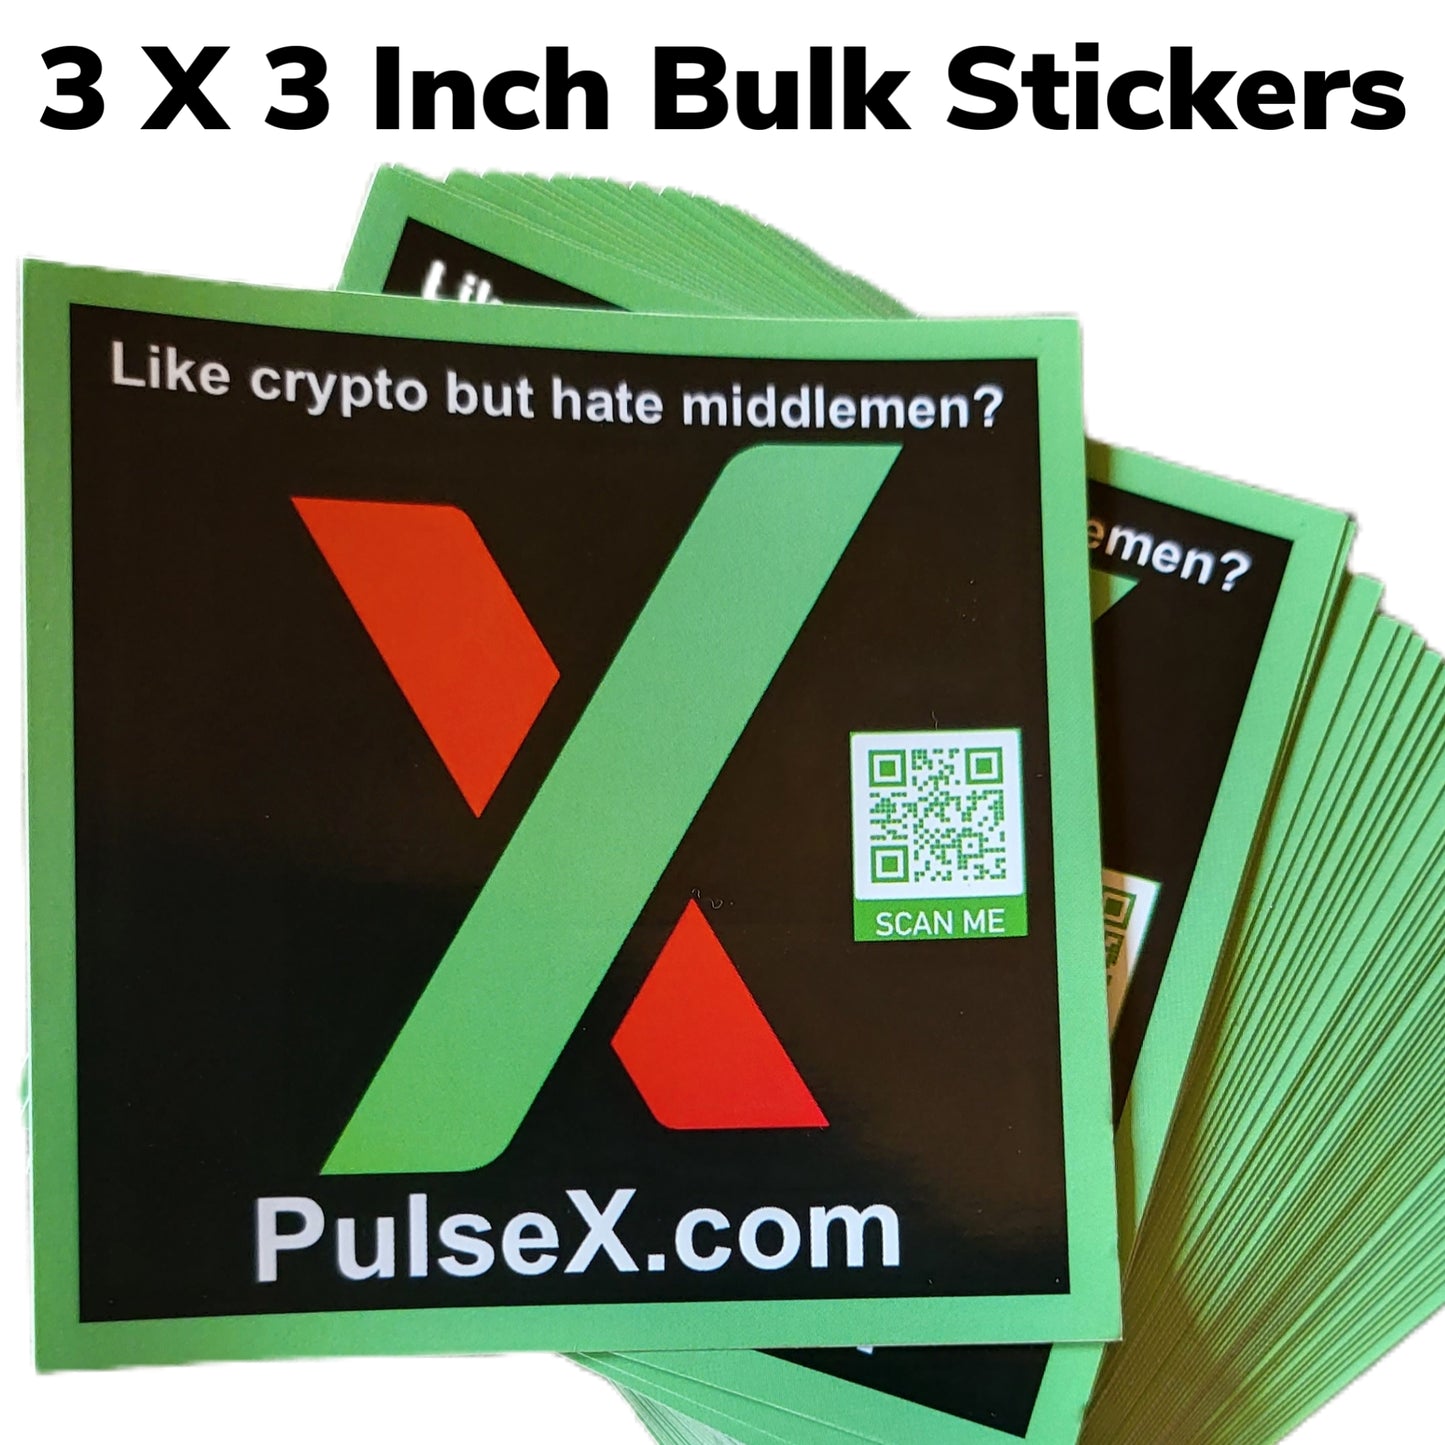 HEX, Pulsechain, and PulseX 3” by 3” Sticker Pack (25)